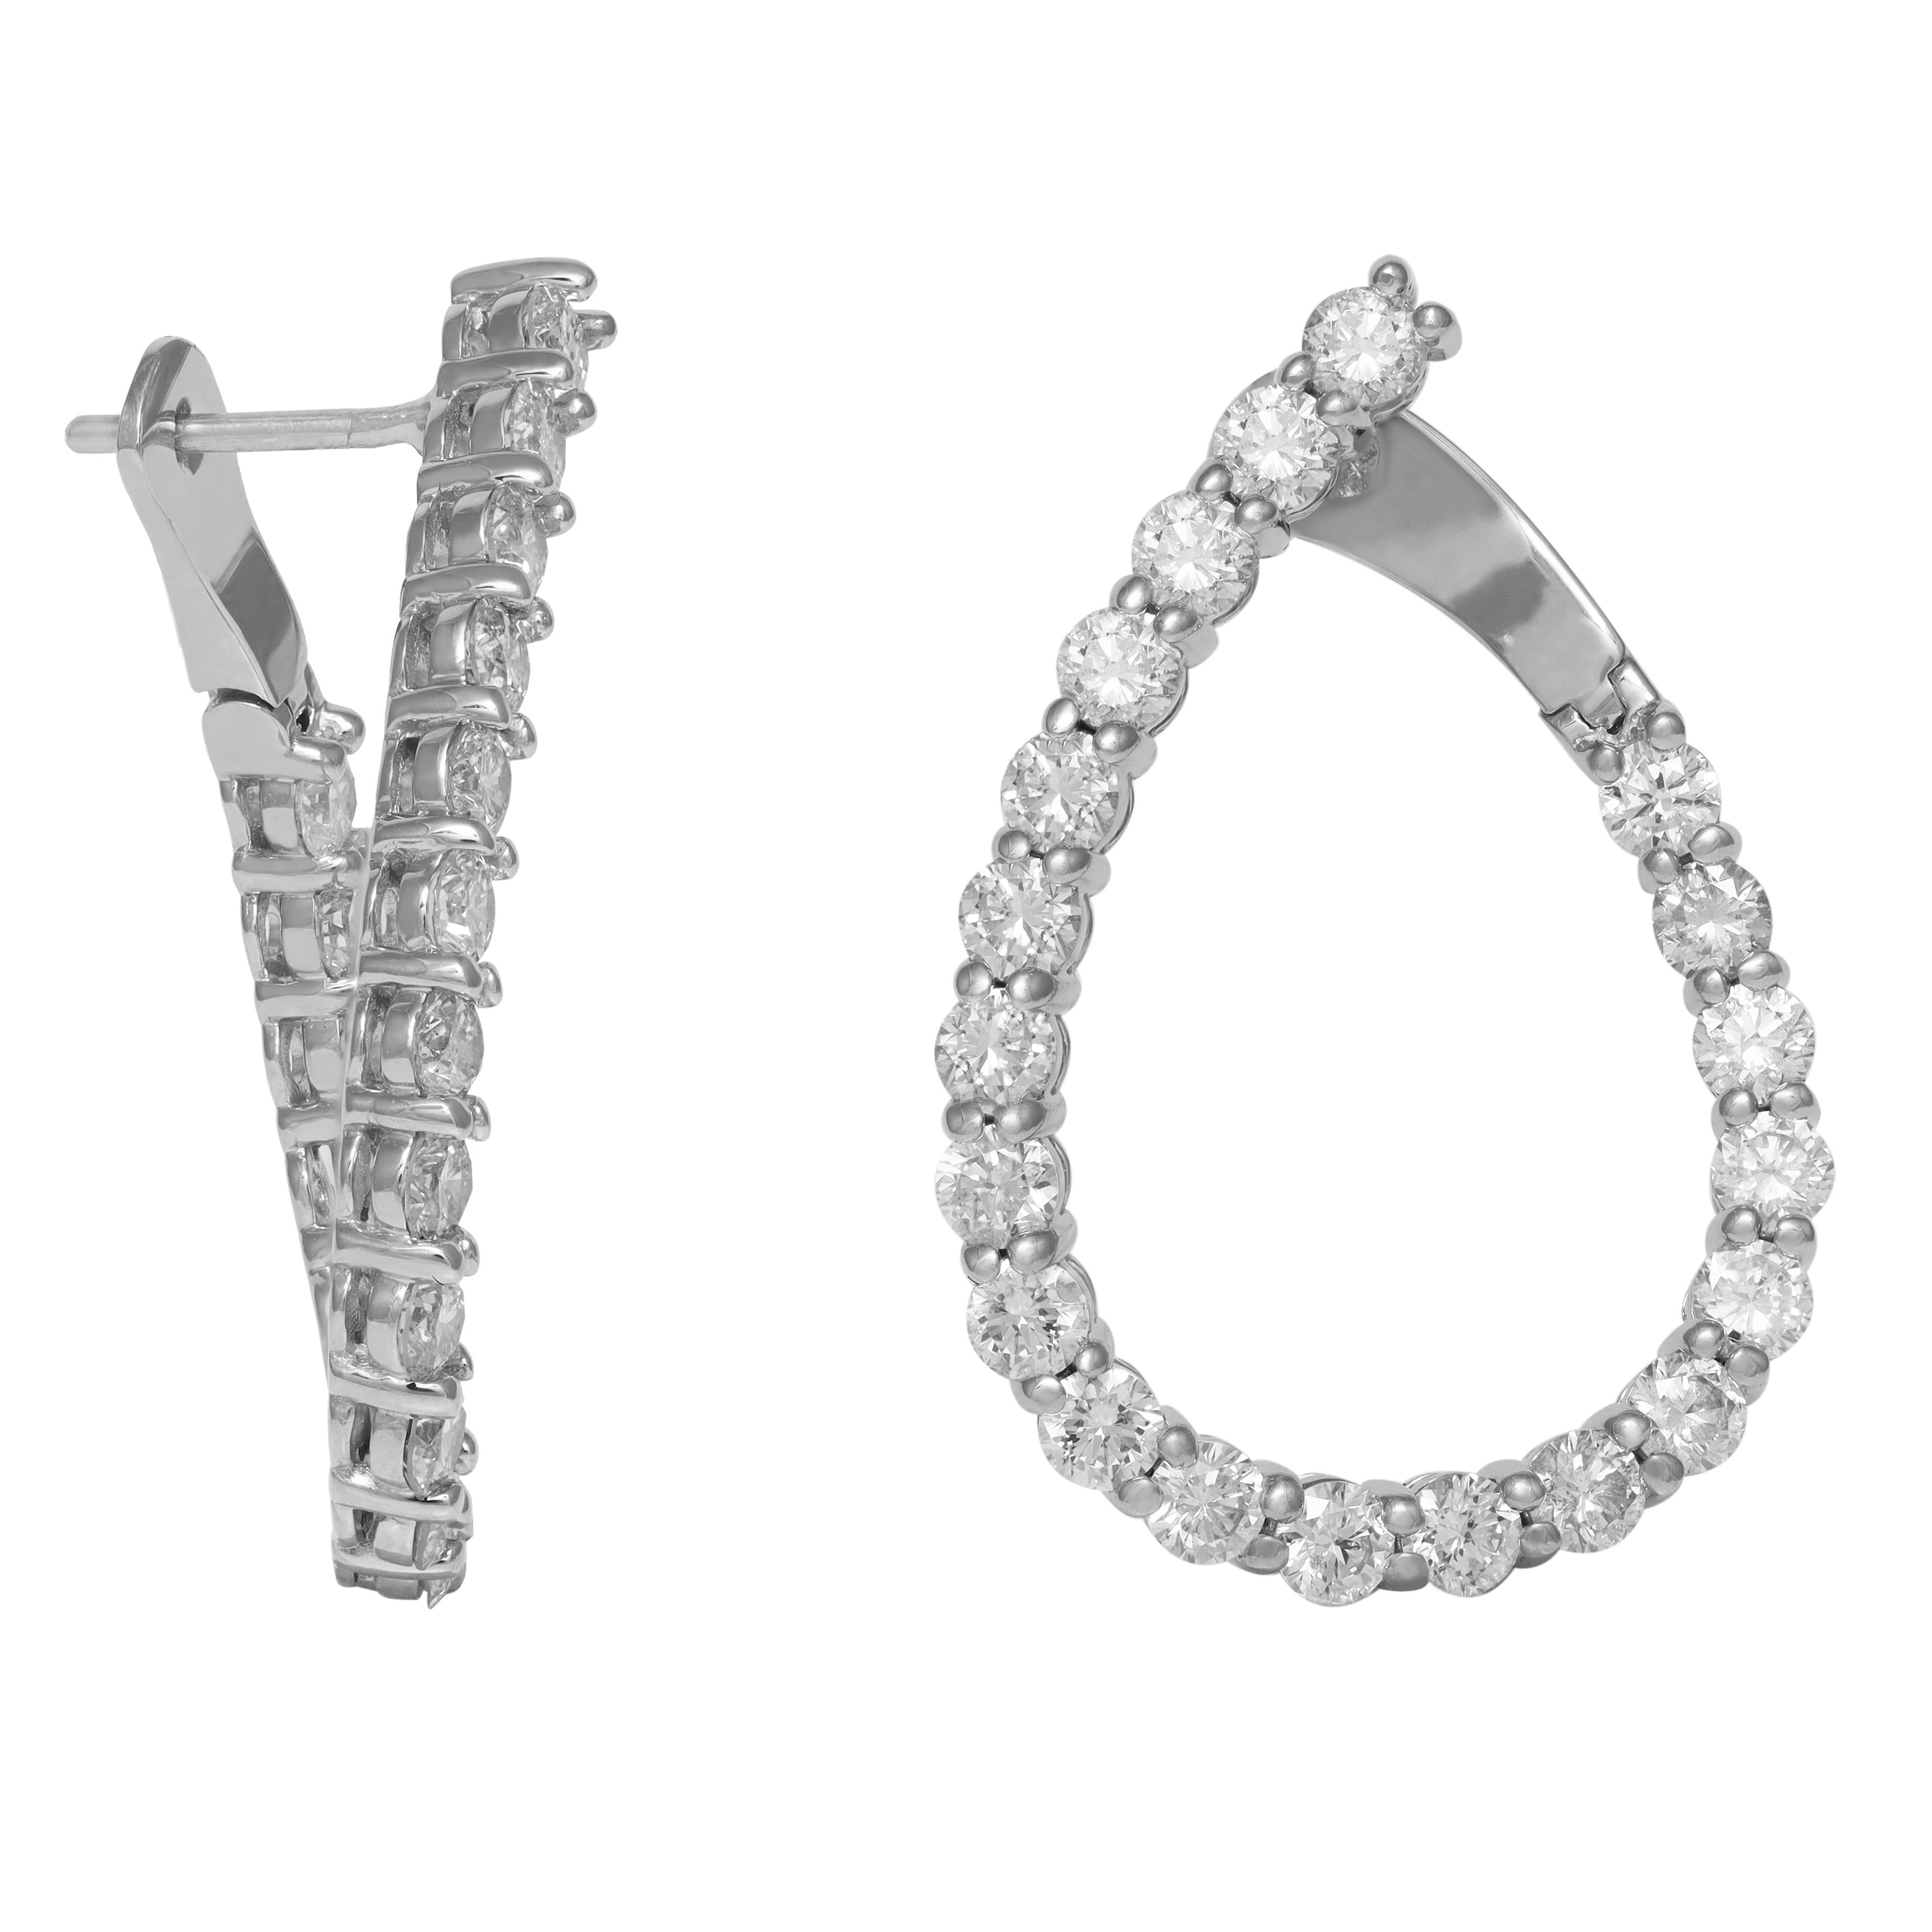 14kt white gold fashion earrings featuring 3.60 cts tw of round diamonds inside/out GH SI
Diana M. is a leading supplier of top-quality fine jewelry for over 35 years.
Diana M is one-stop shop for all your jewelry shopping, carrying line of diamond